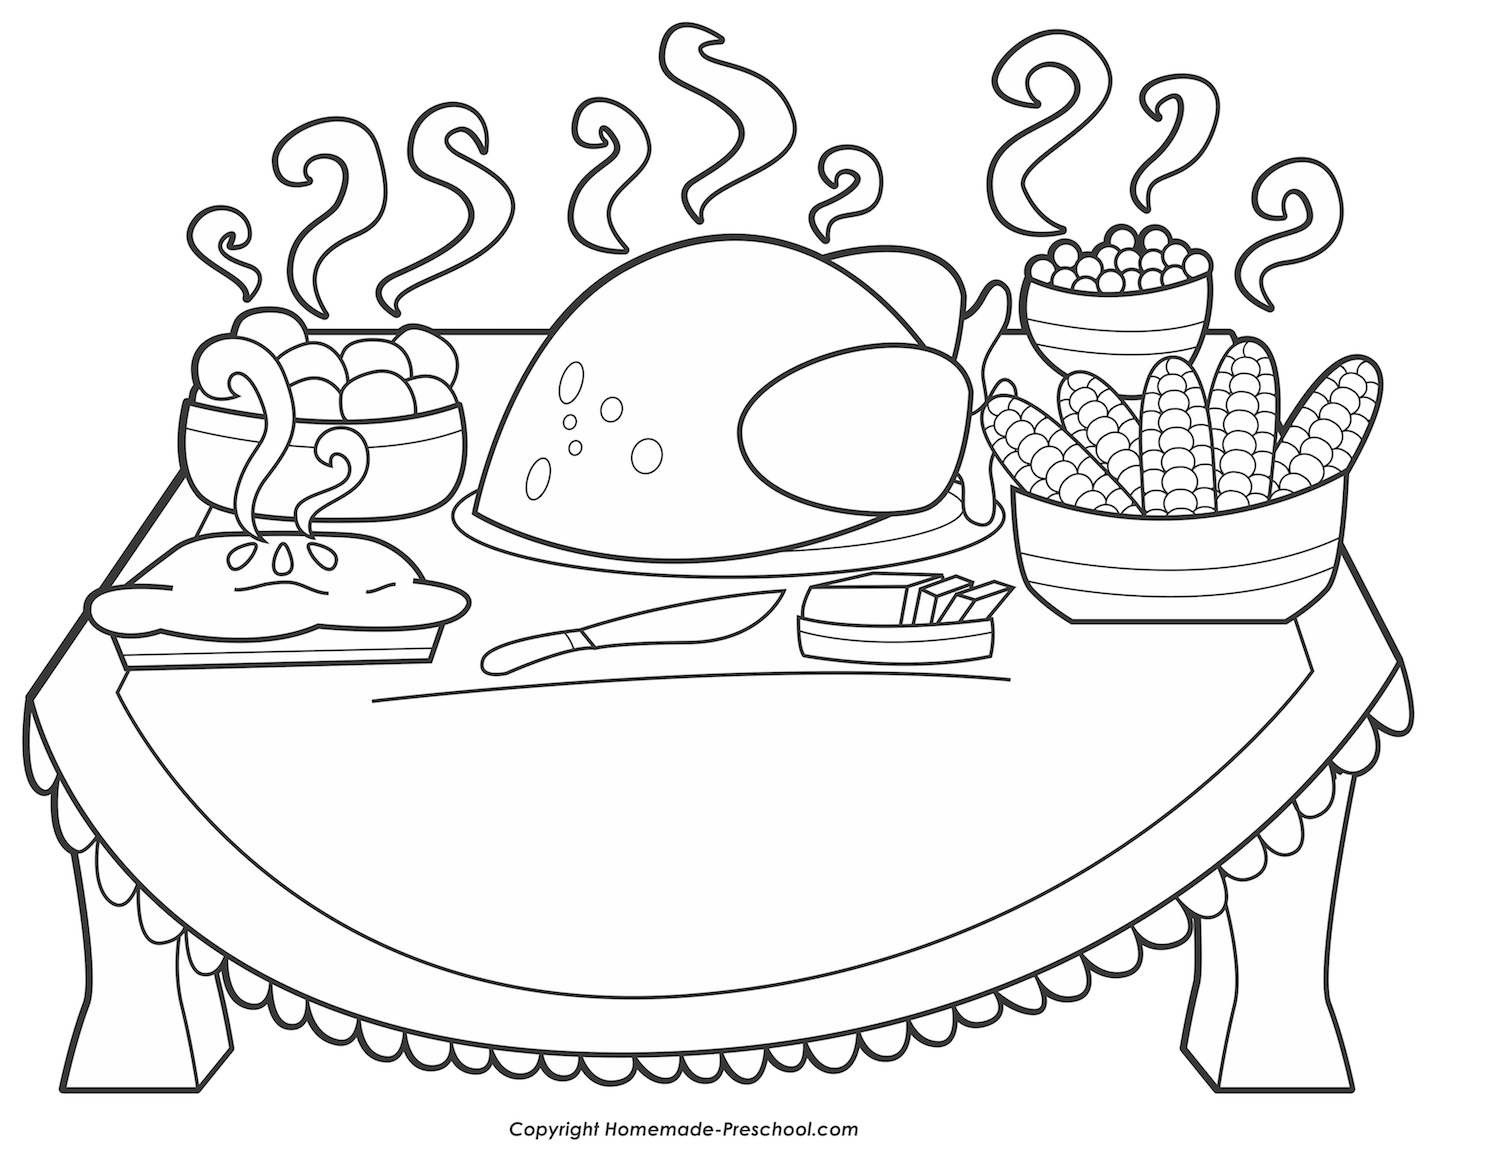 coloring-pages-of-thanksgiving-dinner-free-download-gmbar-co